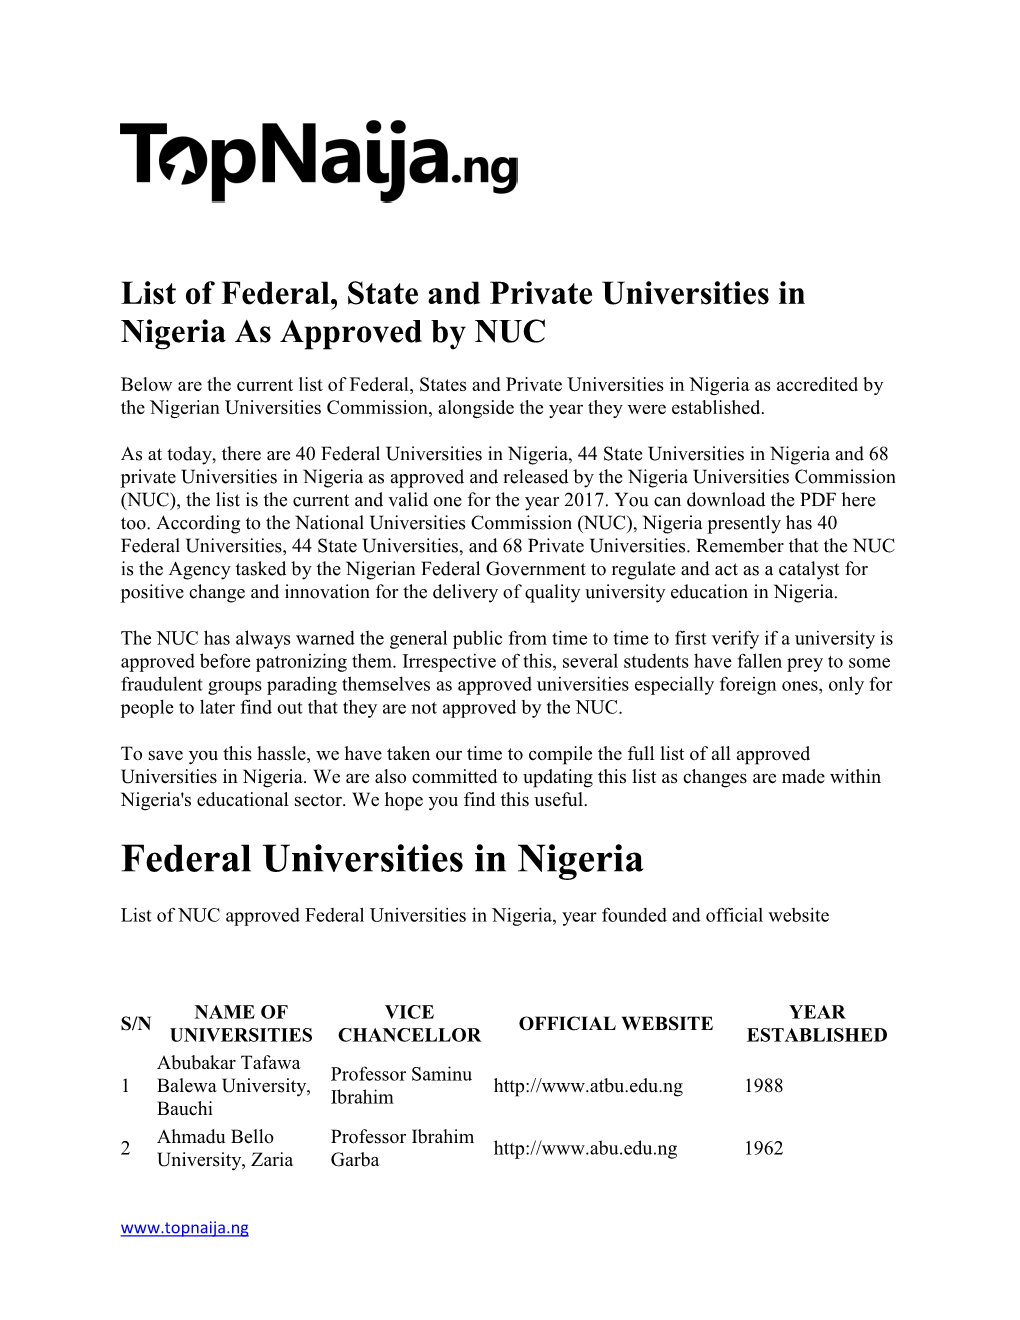 List of Federal, State and Private Universities in Nigeria As Approved by NUC